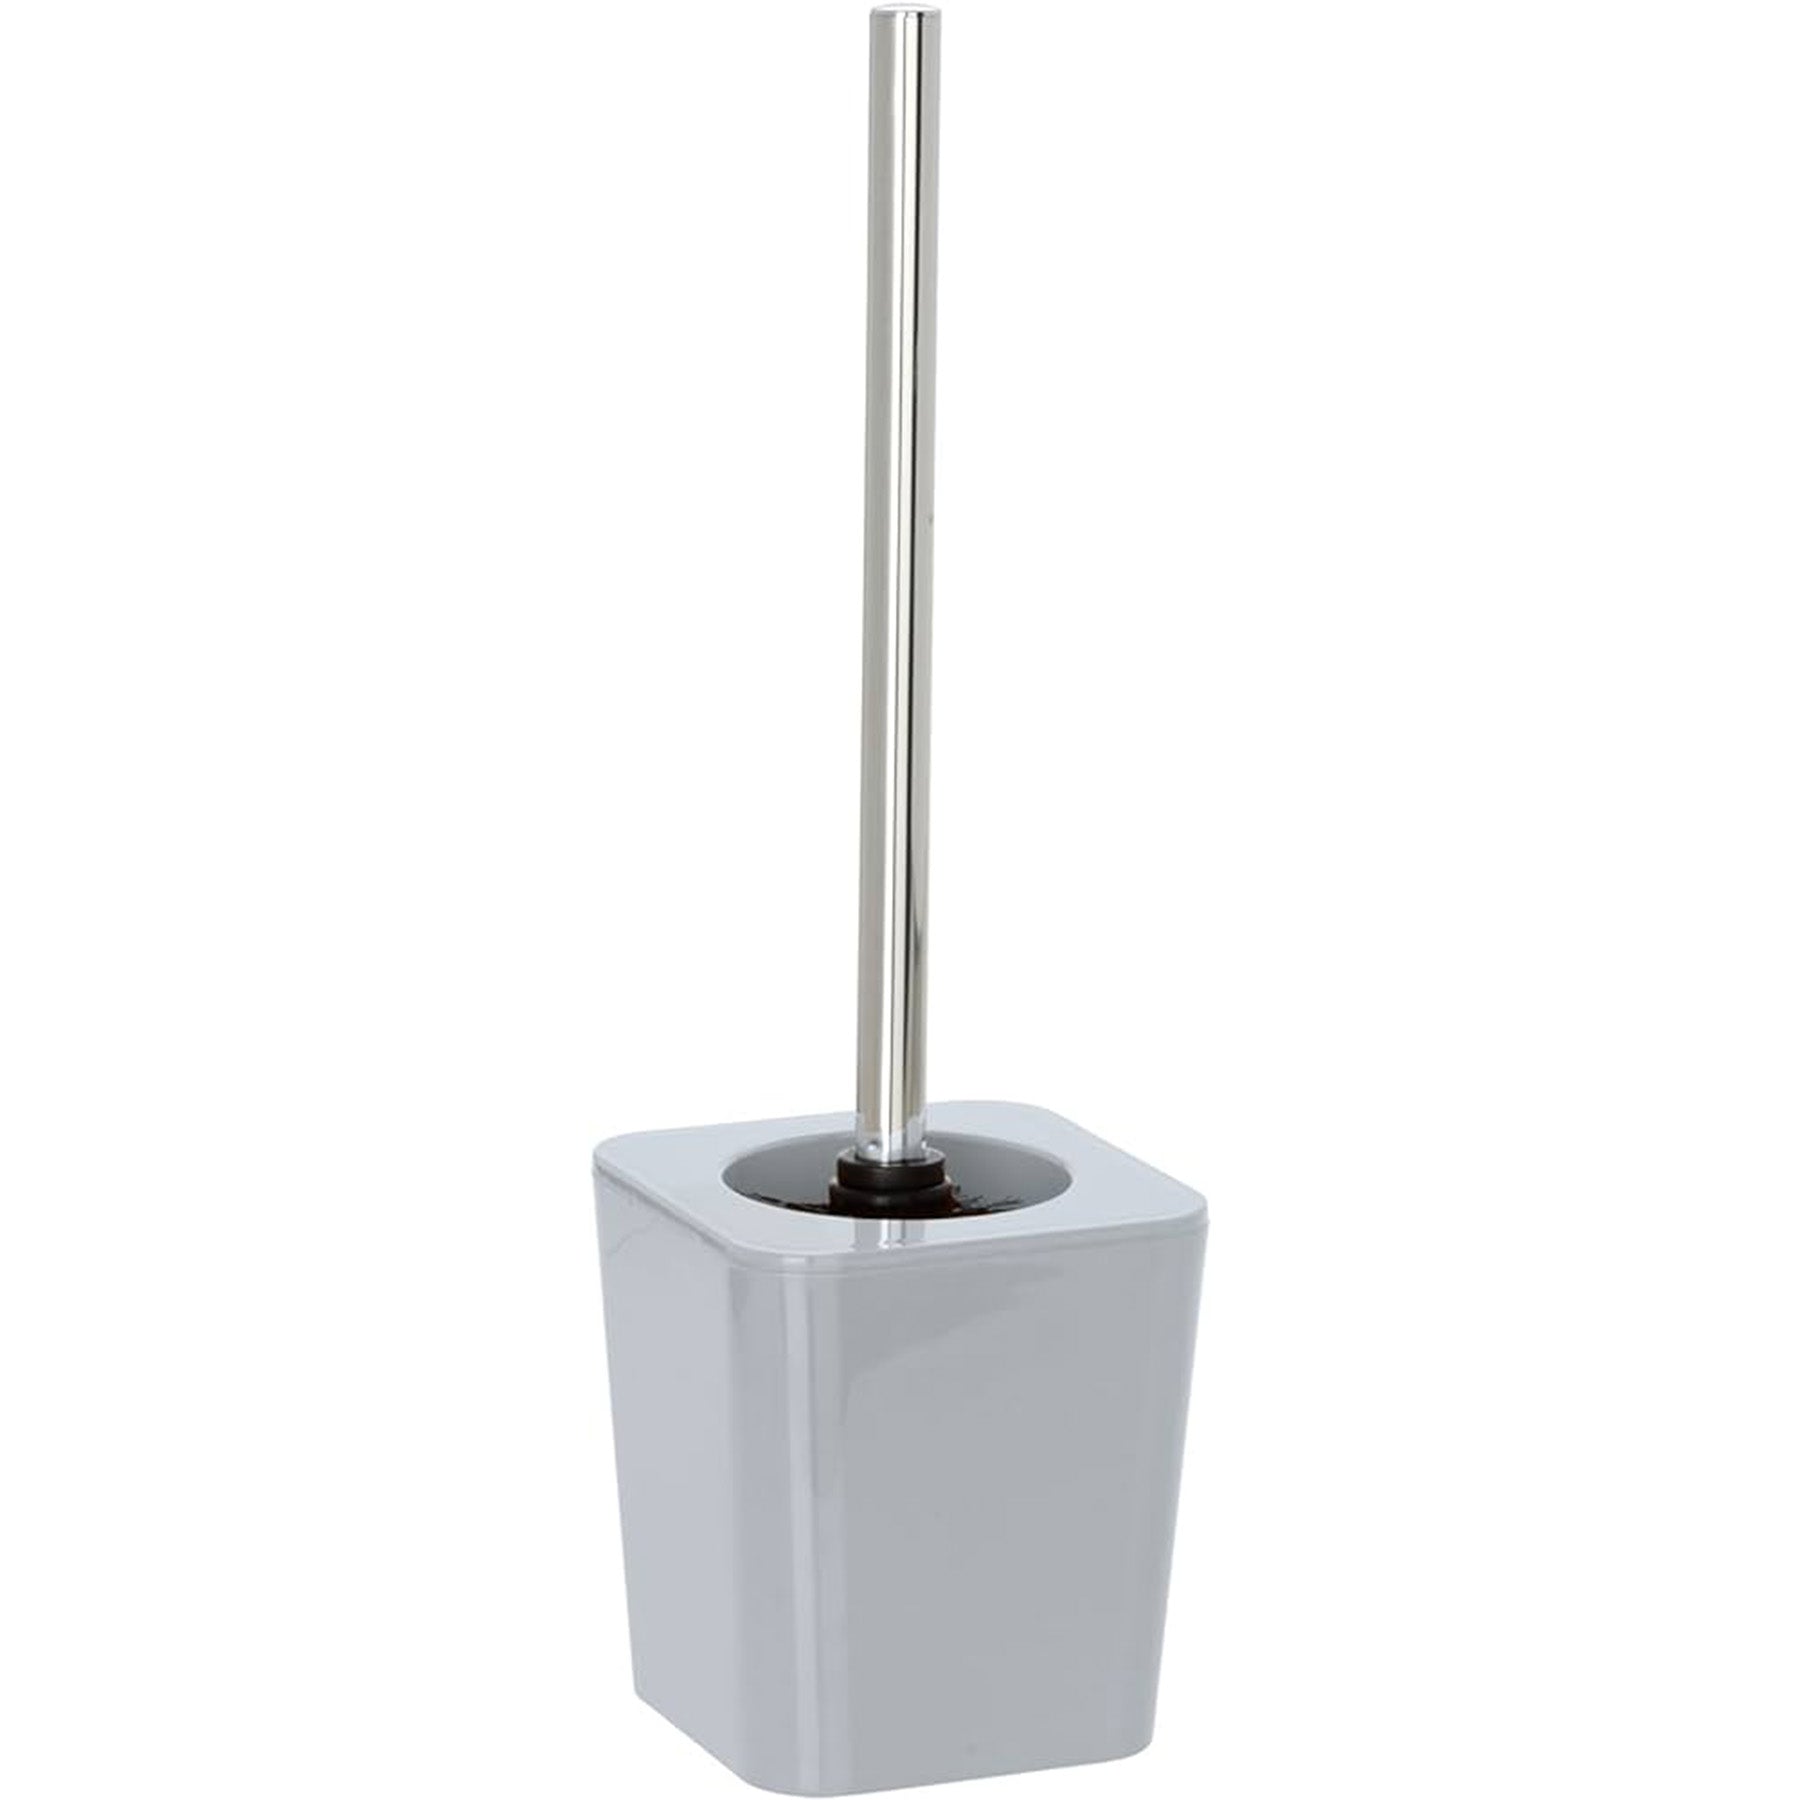 Candy Open Toilet Brush and Holder, Grey, 11.5 x 11.5 x 39 cm